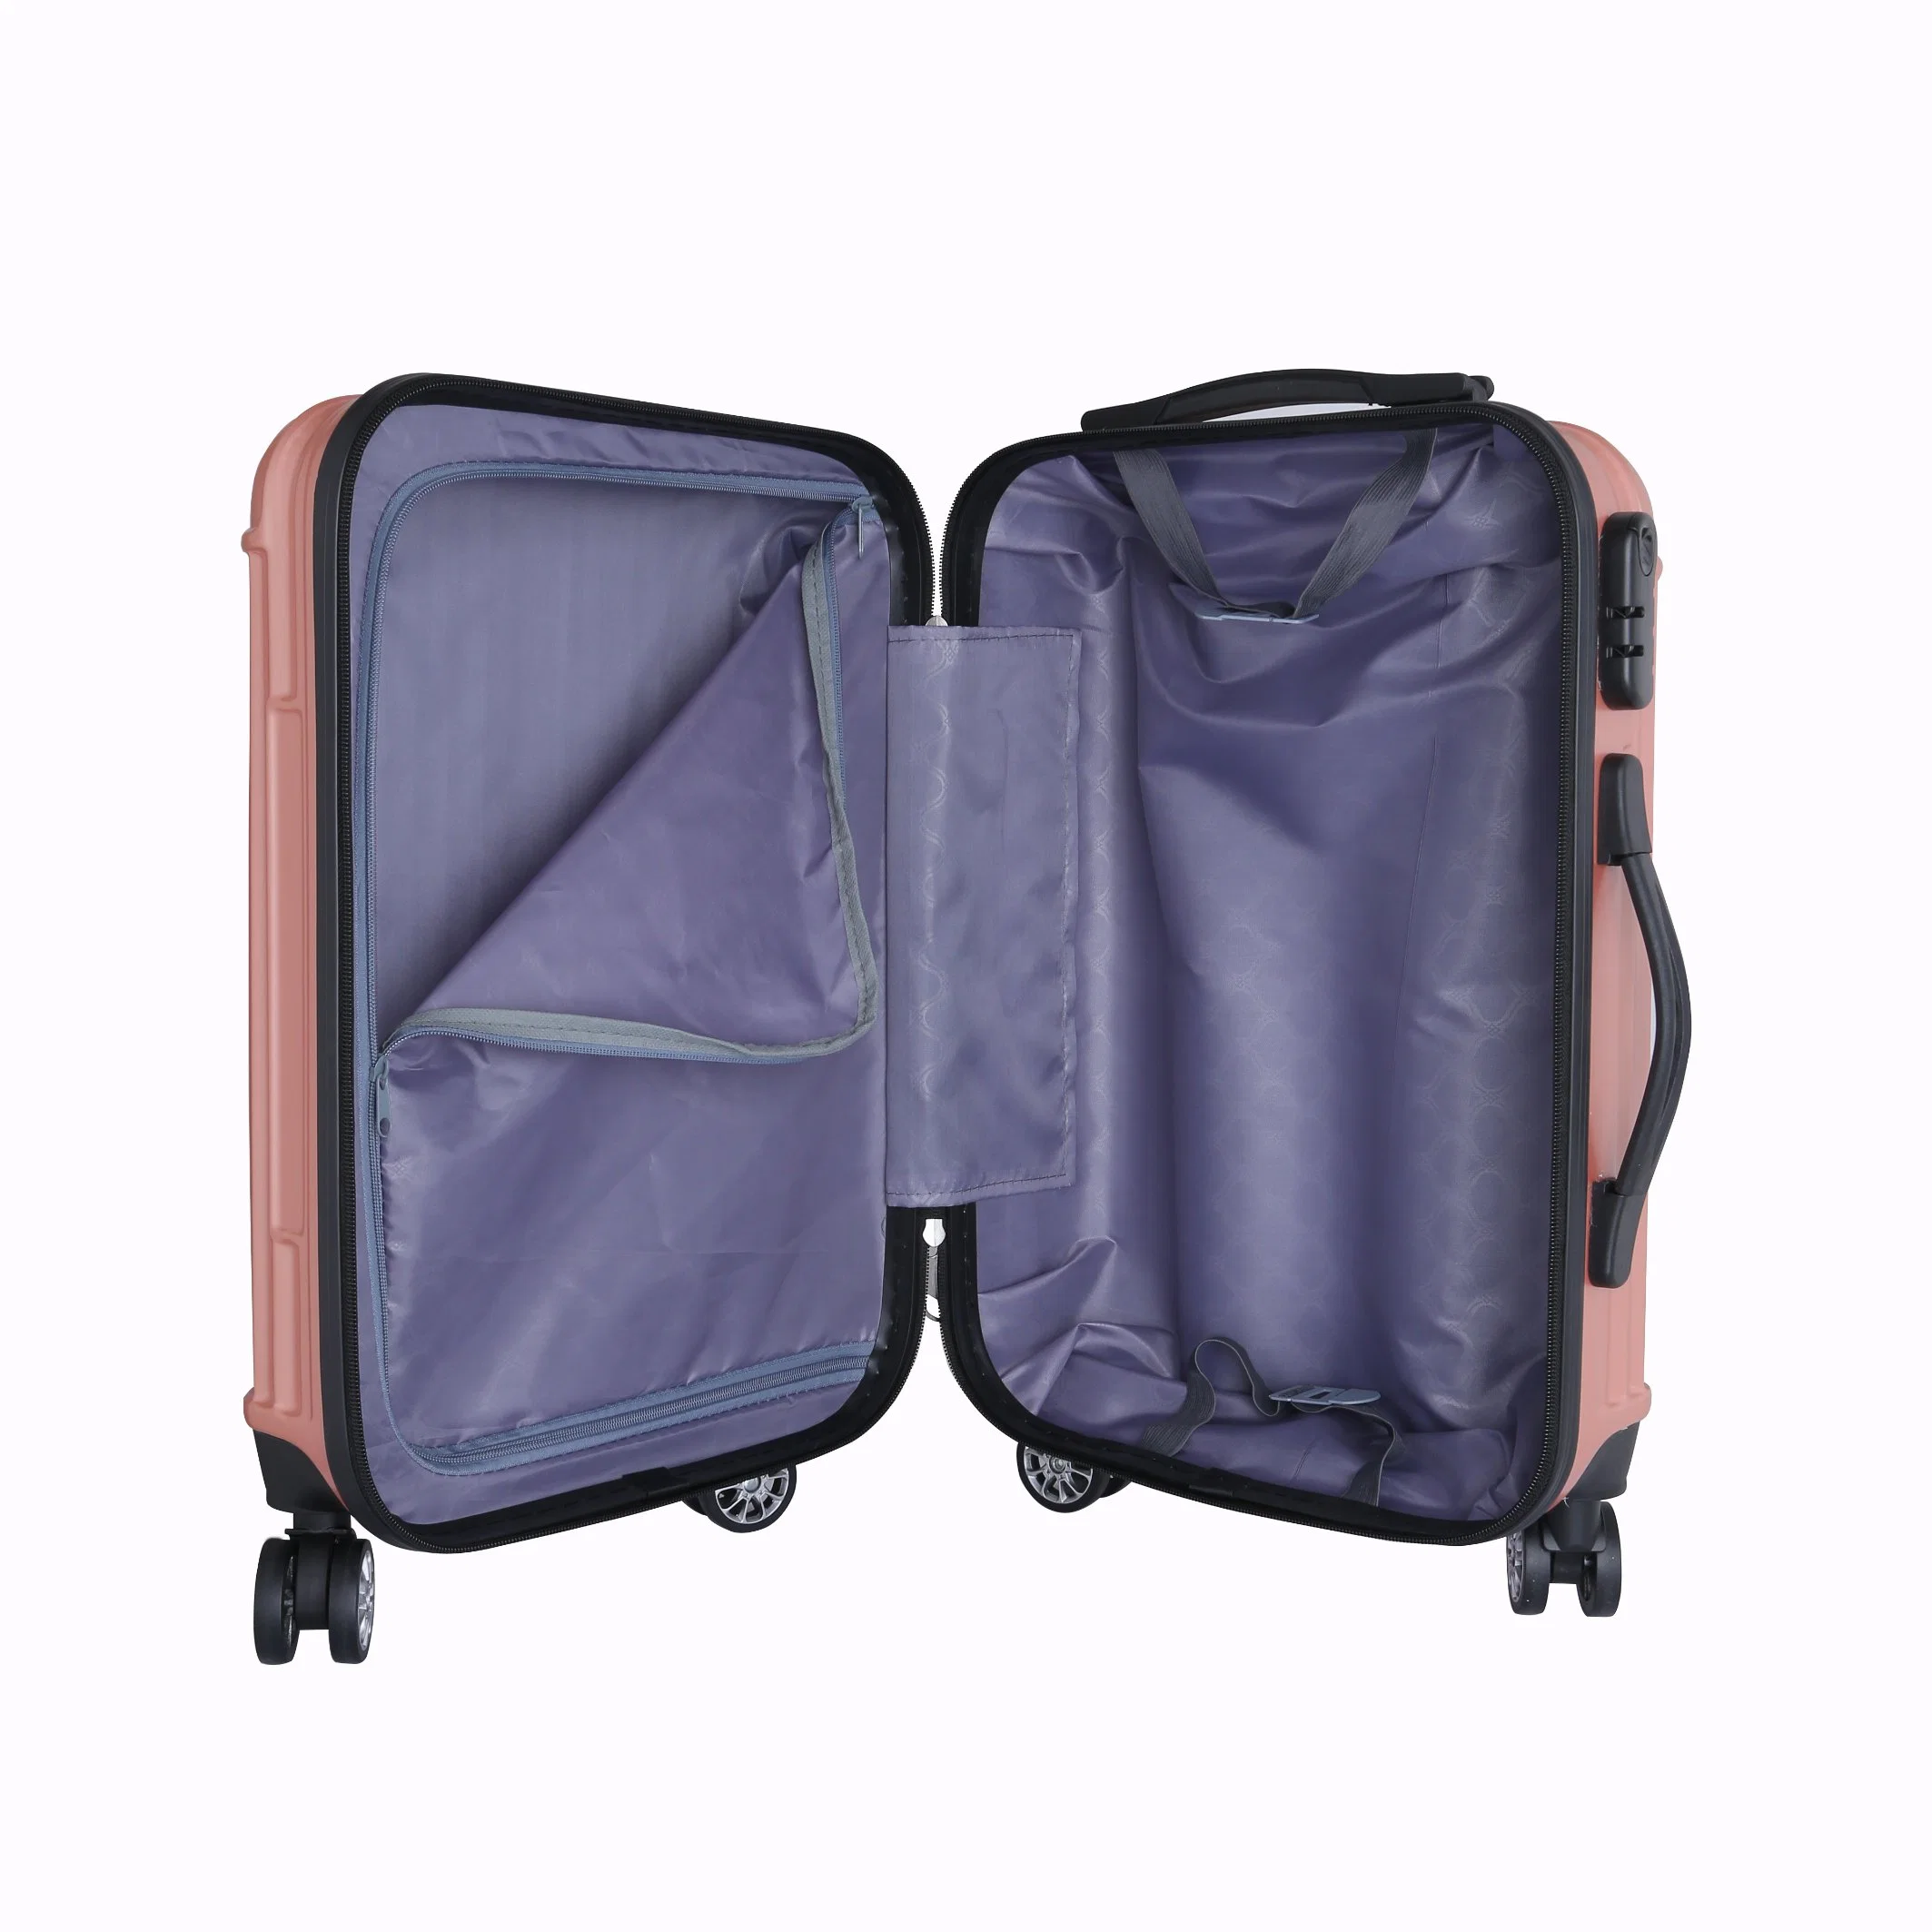 OEM Carry on PC Travelling Suitcase Luggage Bags Trolley Cases Xhp076